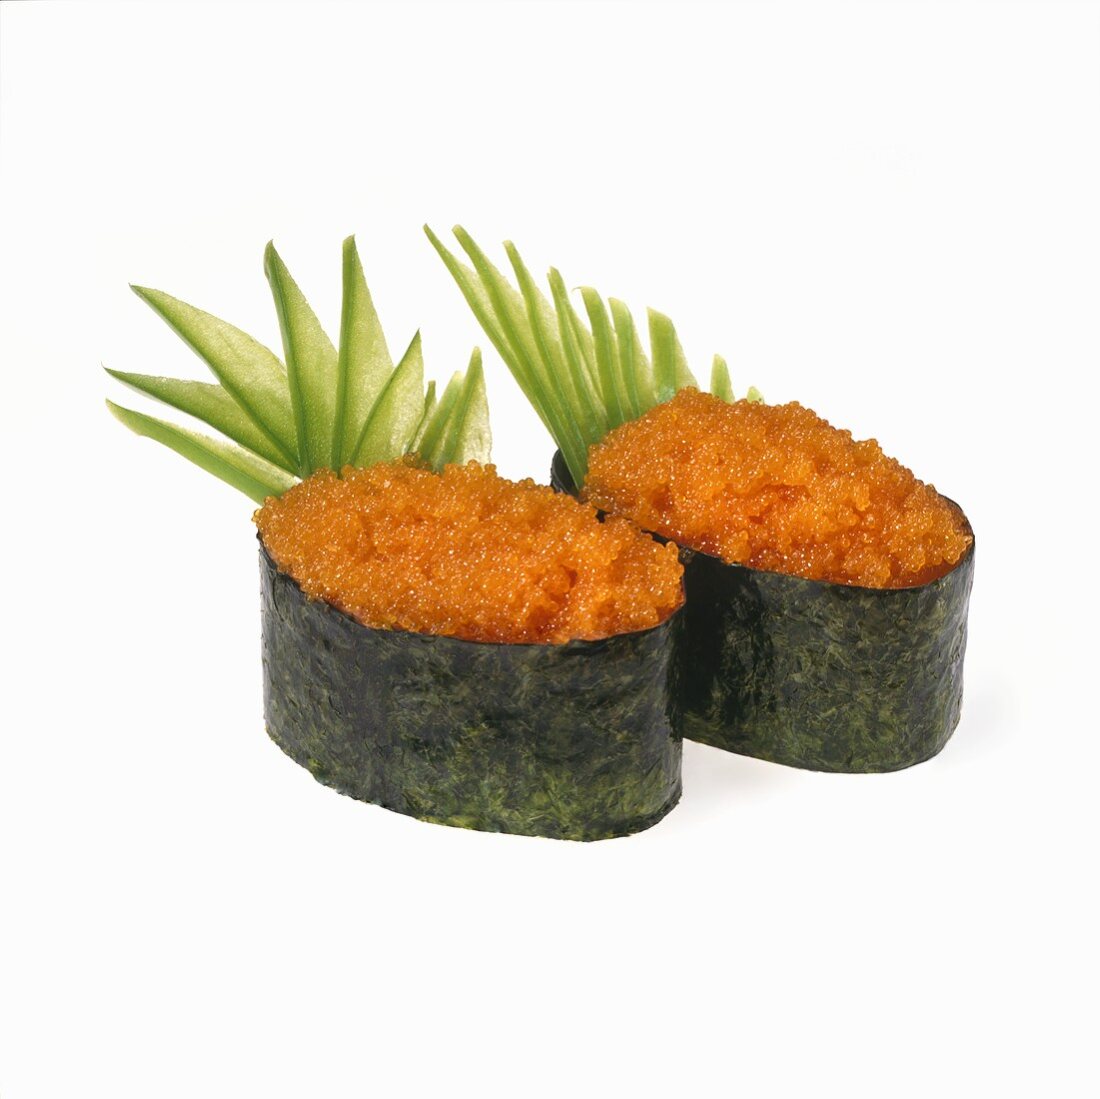 Tobiko; Flying Fish Roe – License Images – 687258 ❘ StockFood